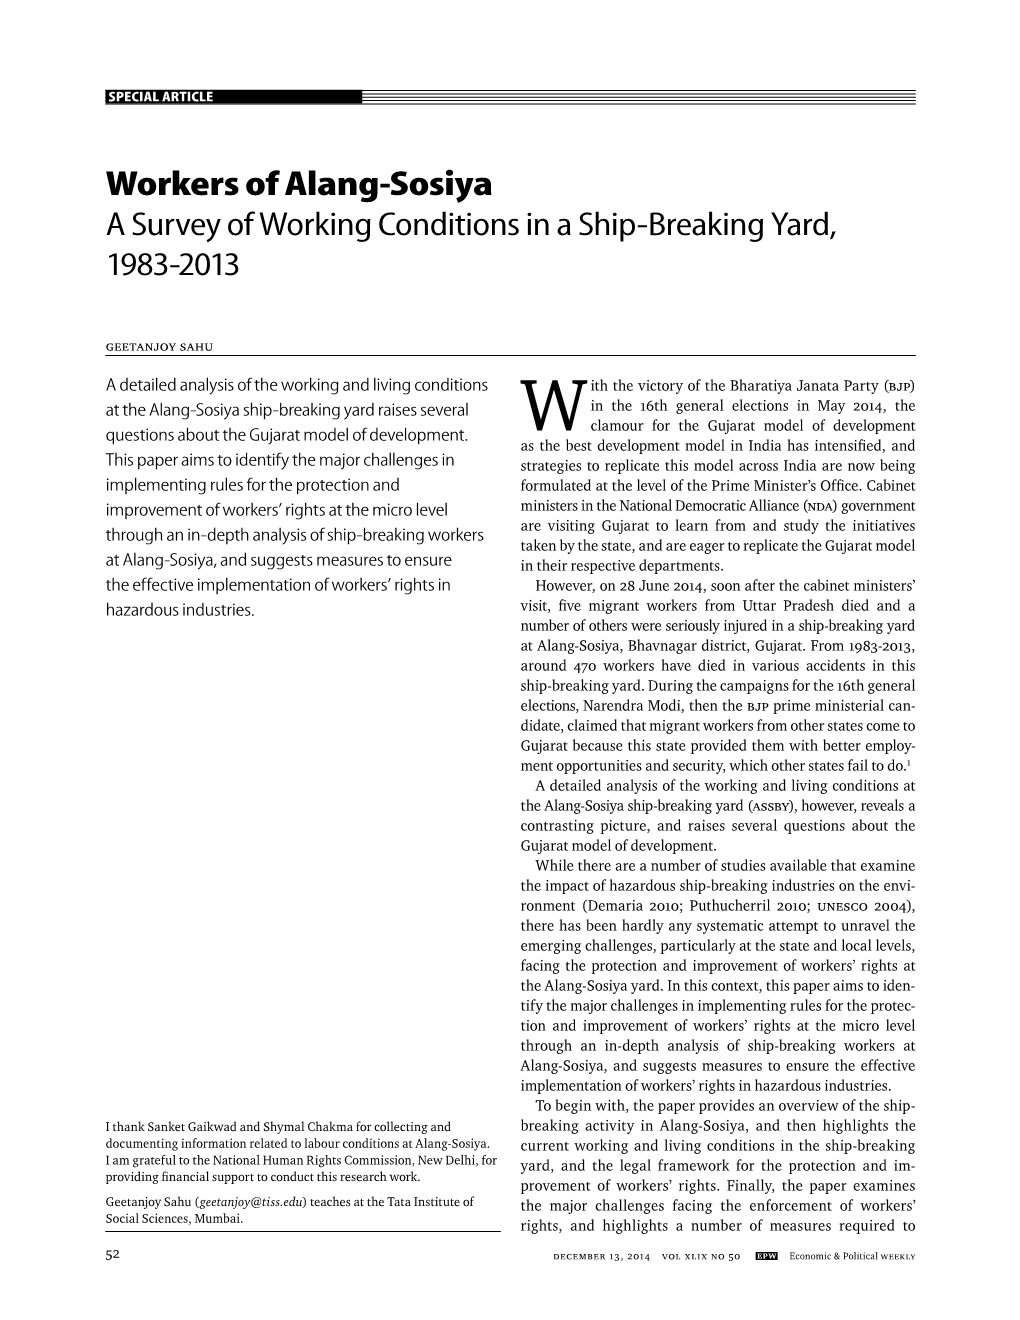 Workers of Alang-Sosiya a Survey of Working Conditions in a Ship-Breaking Yard, 1983-2013